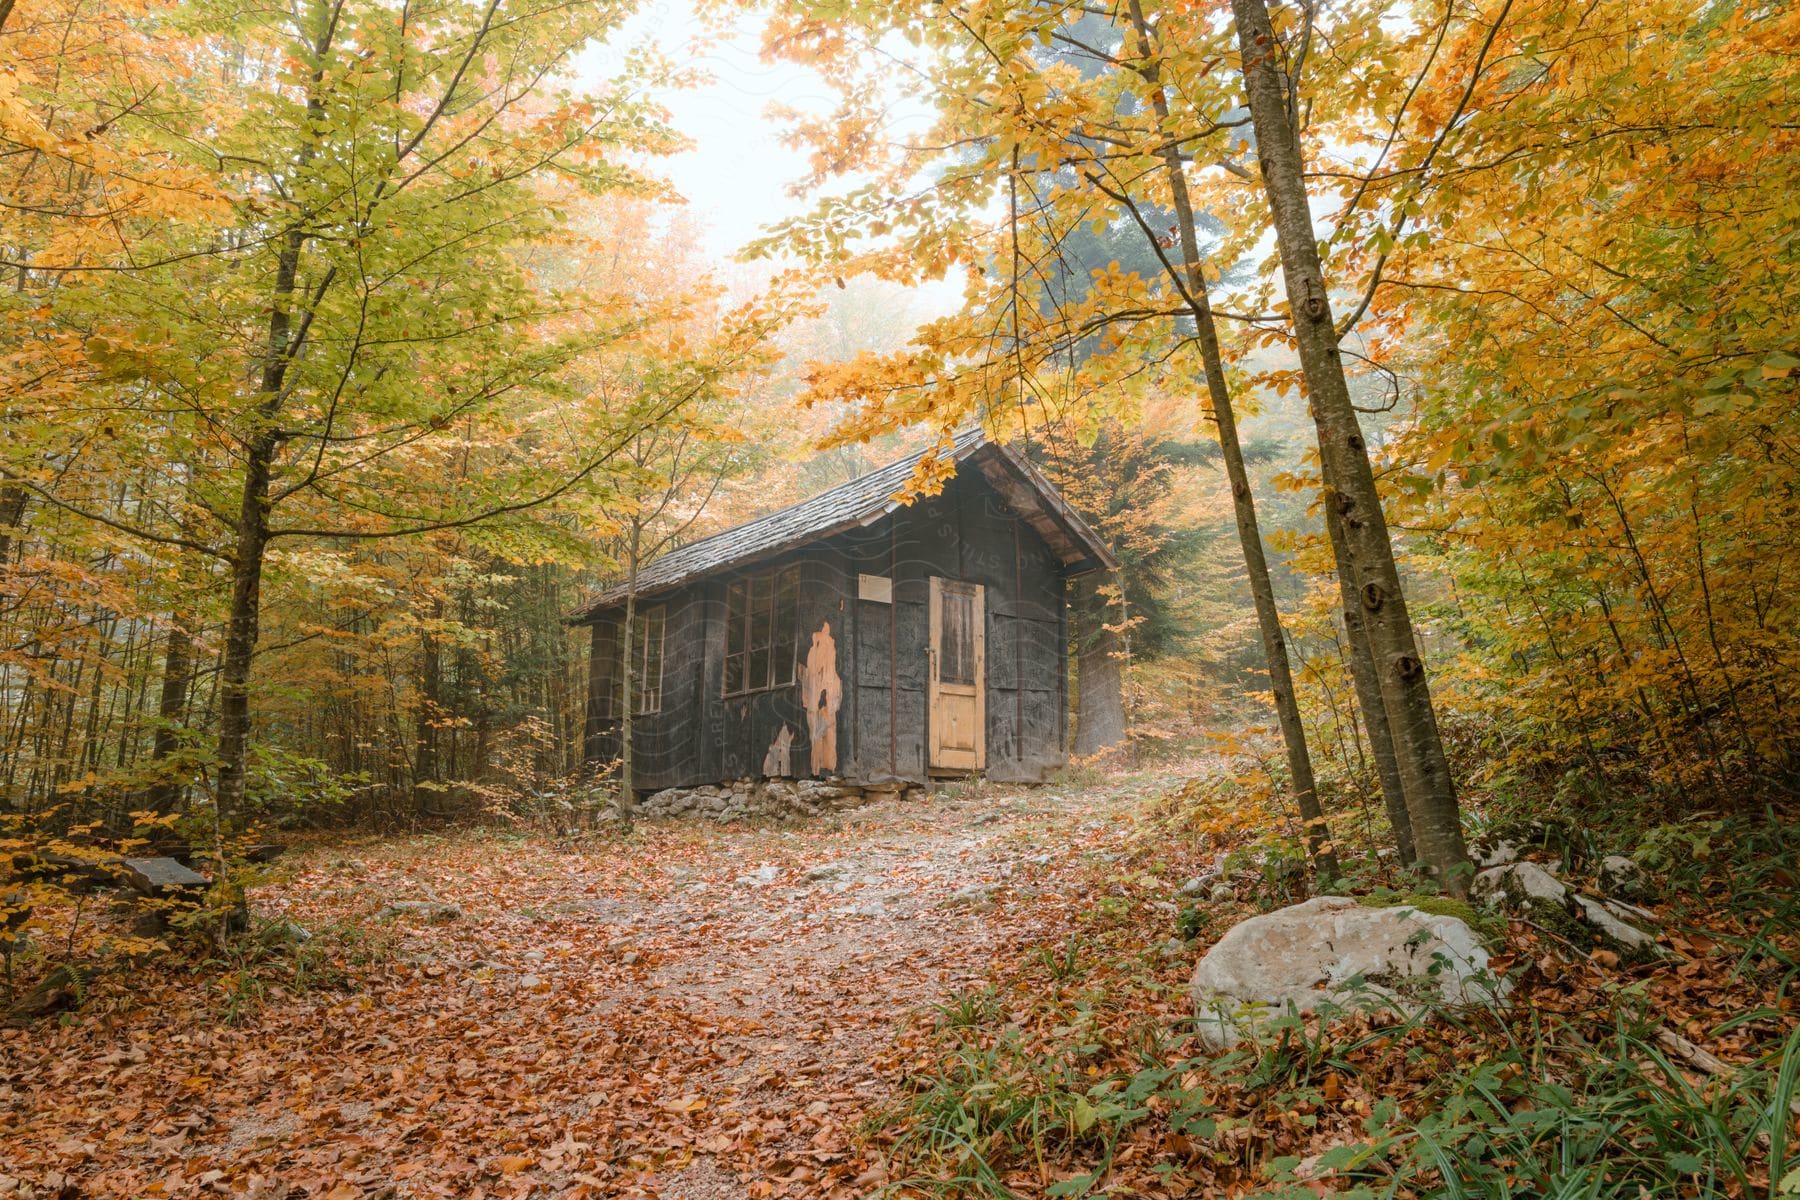 A cabin surrounded by trees with fall leaves on the ground and on the trees